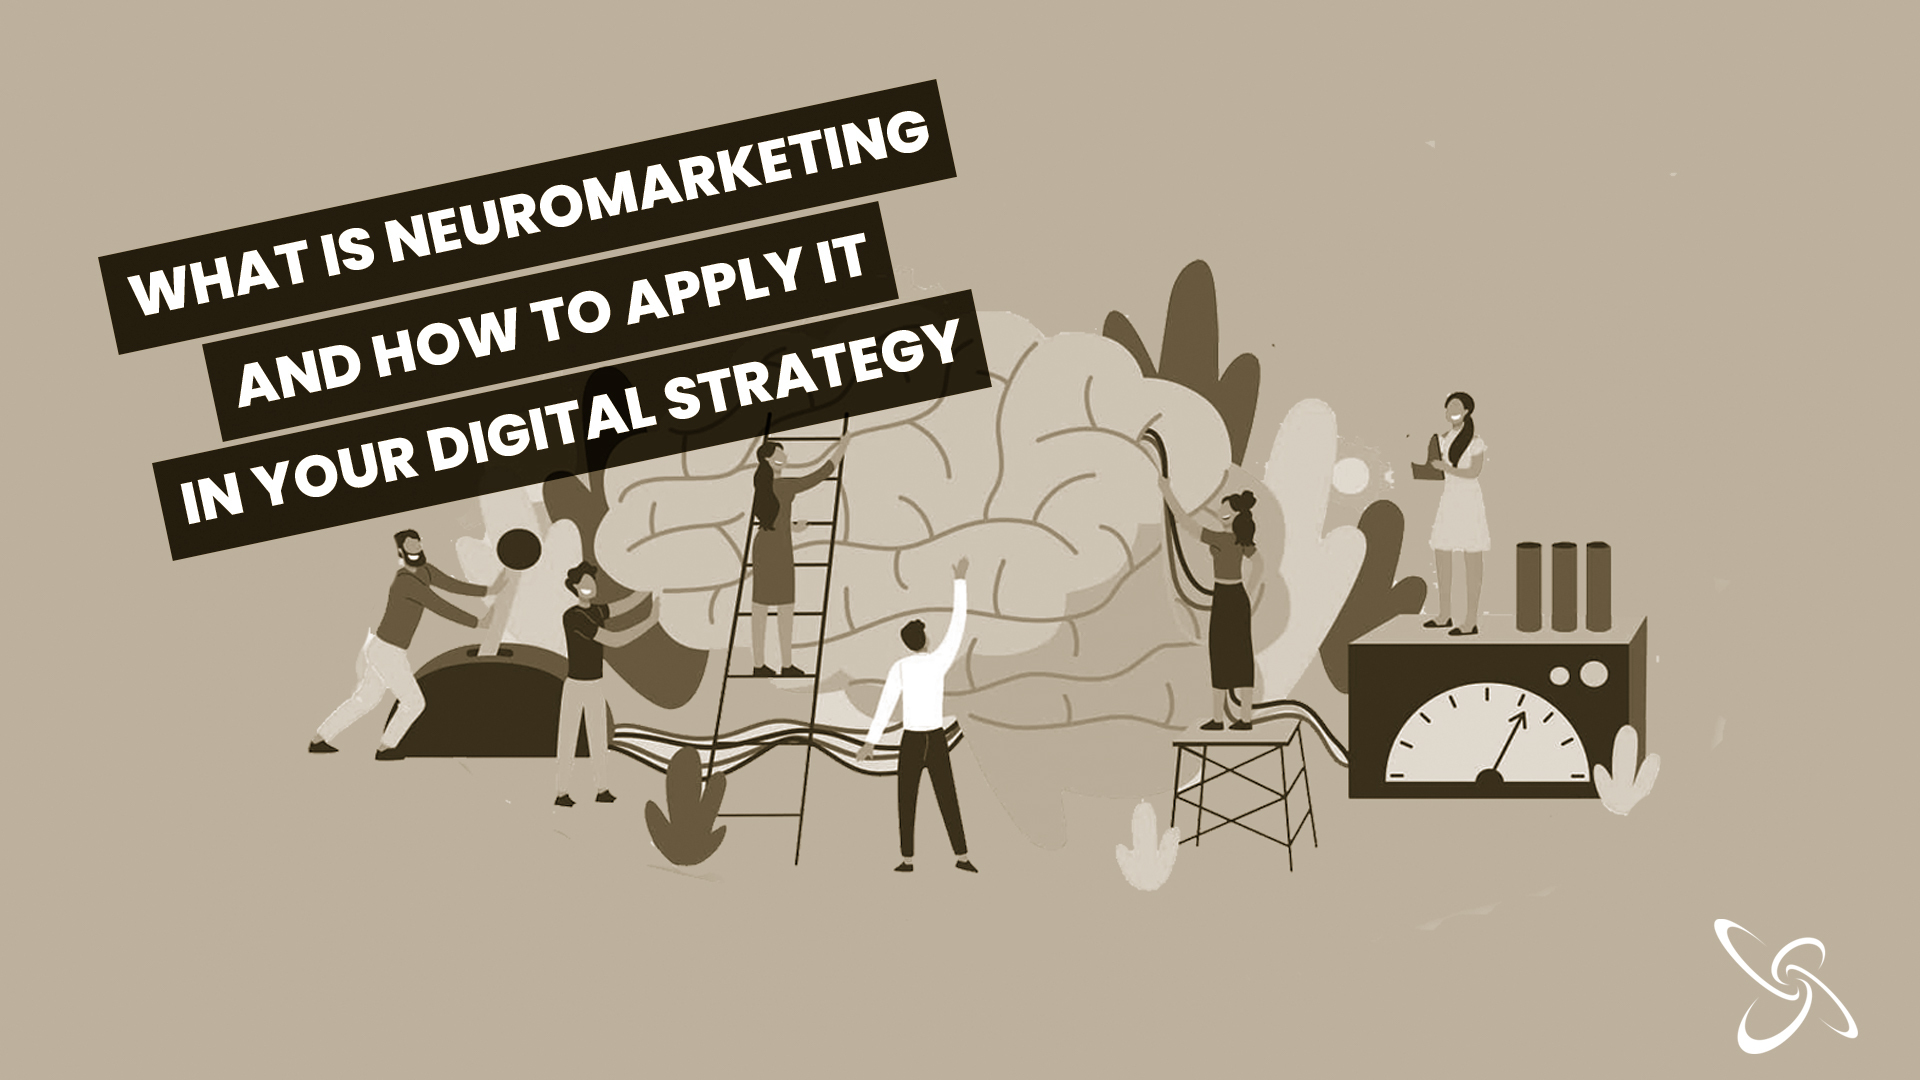 what is neuromarketing and how to apply it in your digital strategy